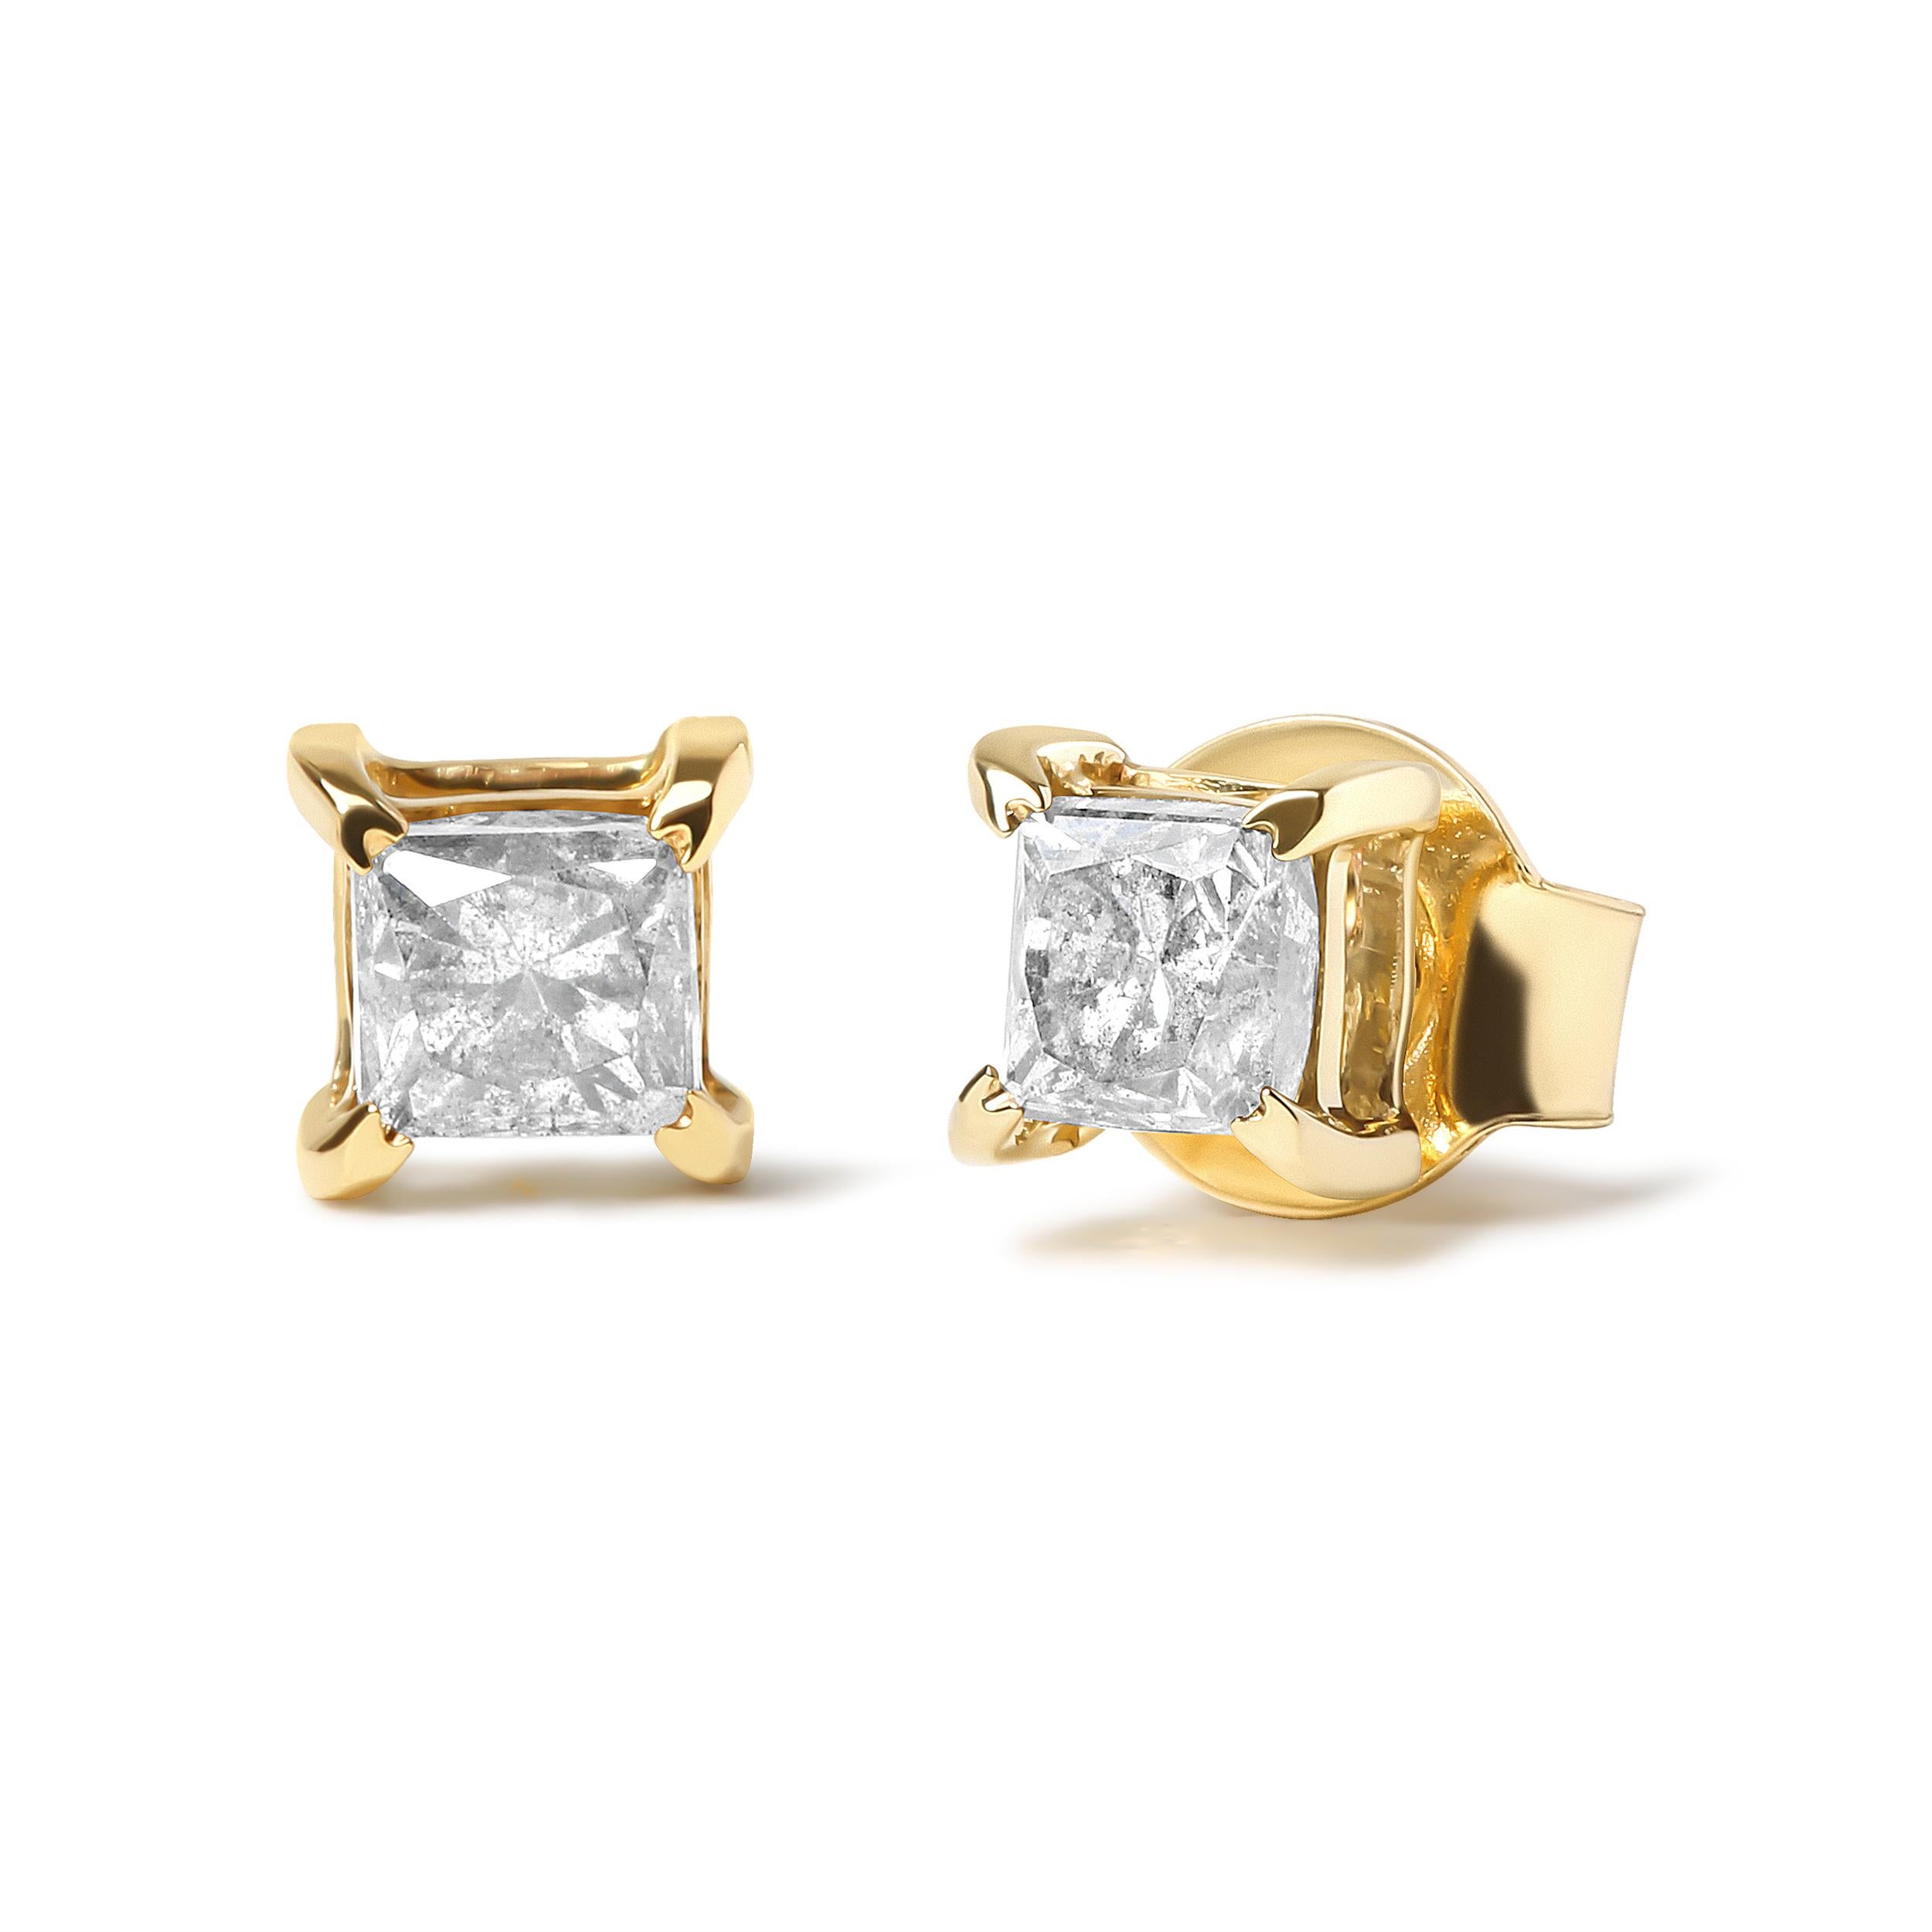 Elevate your style with these IGI certified princess stud earrings. Crafted with 14K yellow gold, they feature two natural brown color diamonds, each weighing 5/8 carats. The diamonds are cut in a classic princess shape and set in a timeless 4-prong